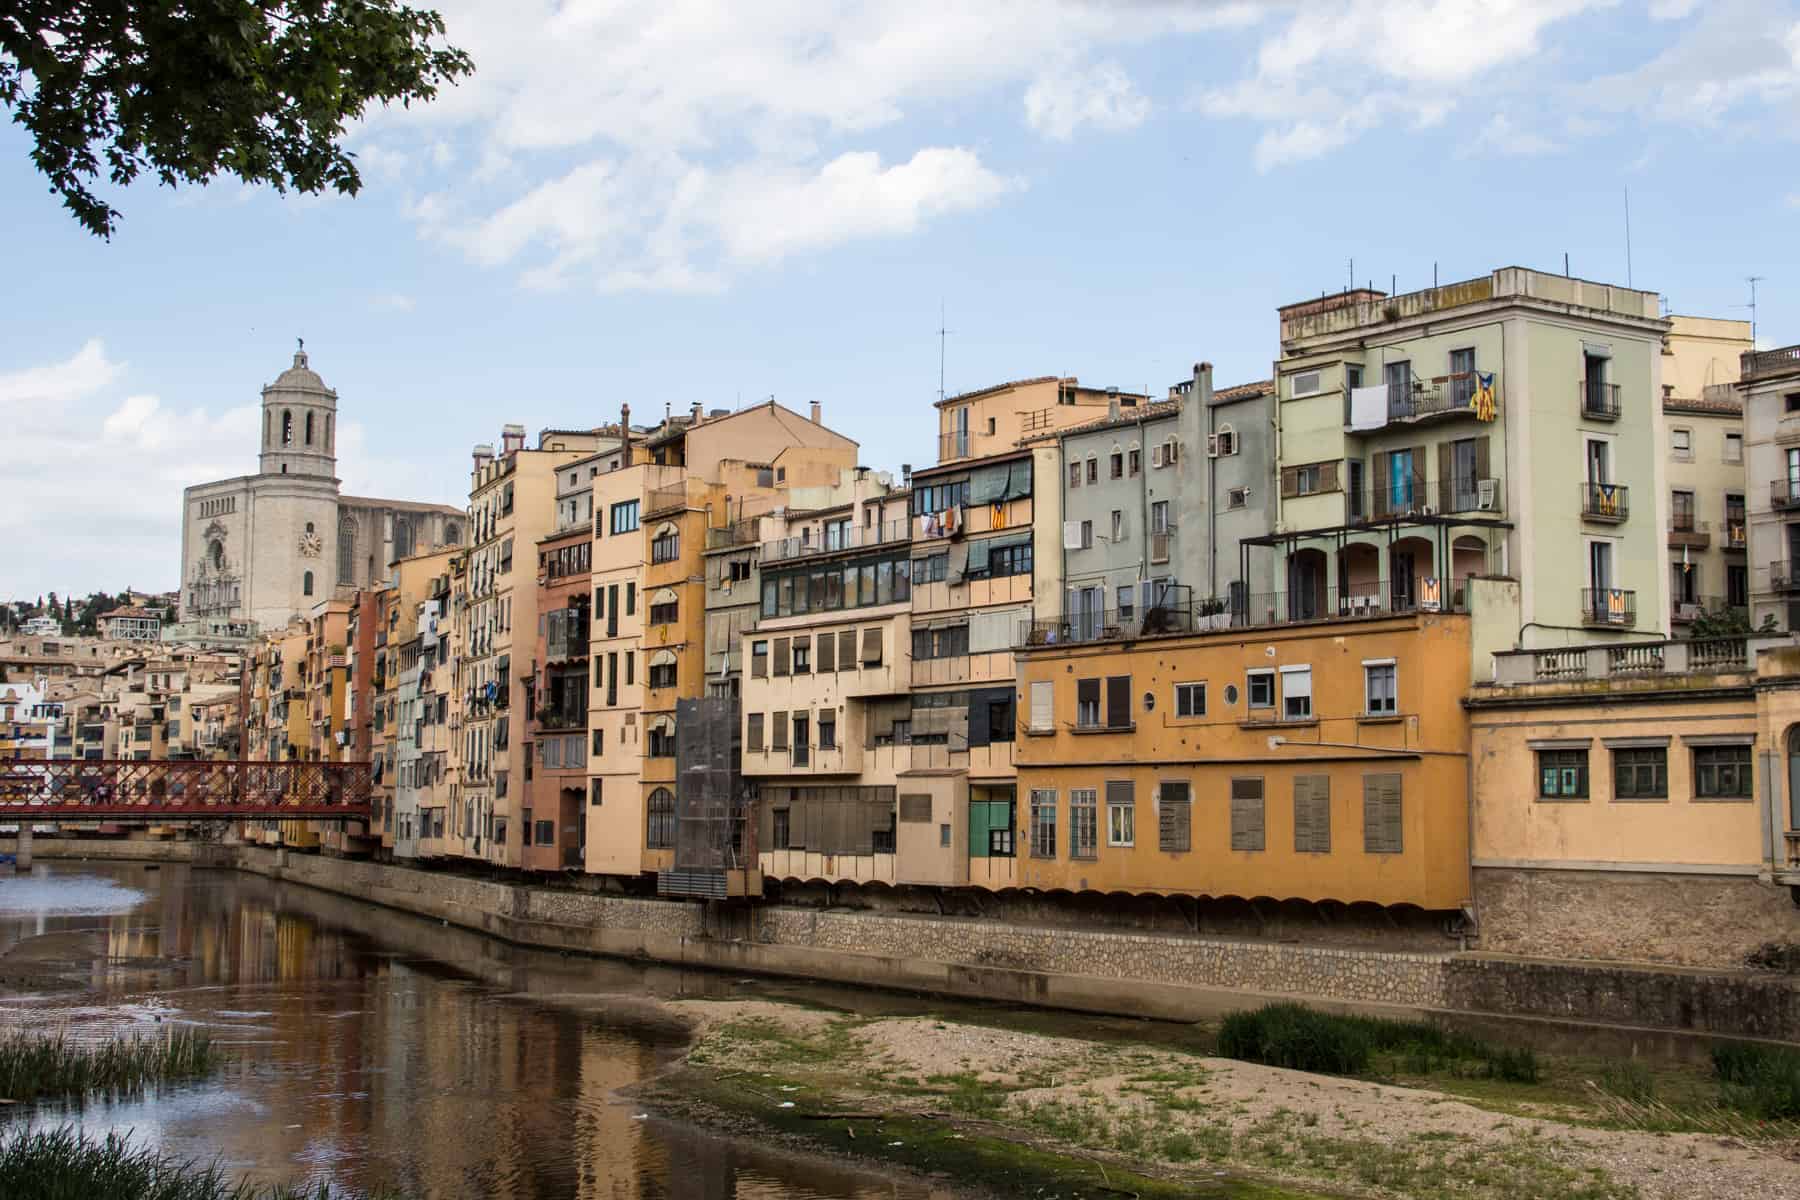 A row of square and rectangular buildings in shades of yellow, orange an mint sit next to a river. At the far end is a small red iron bridge, and beyond that the white spire of a church. 